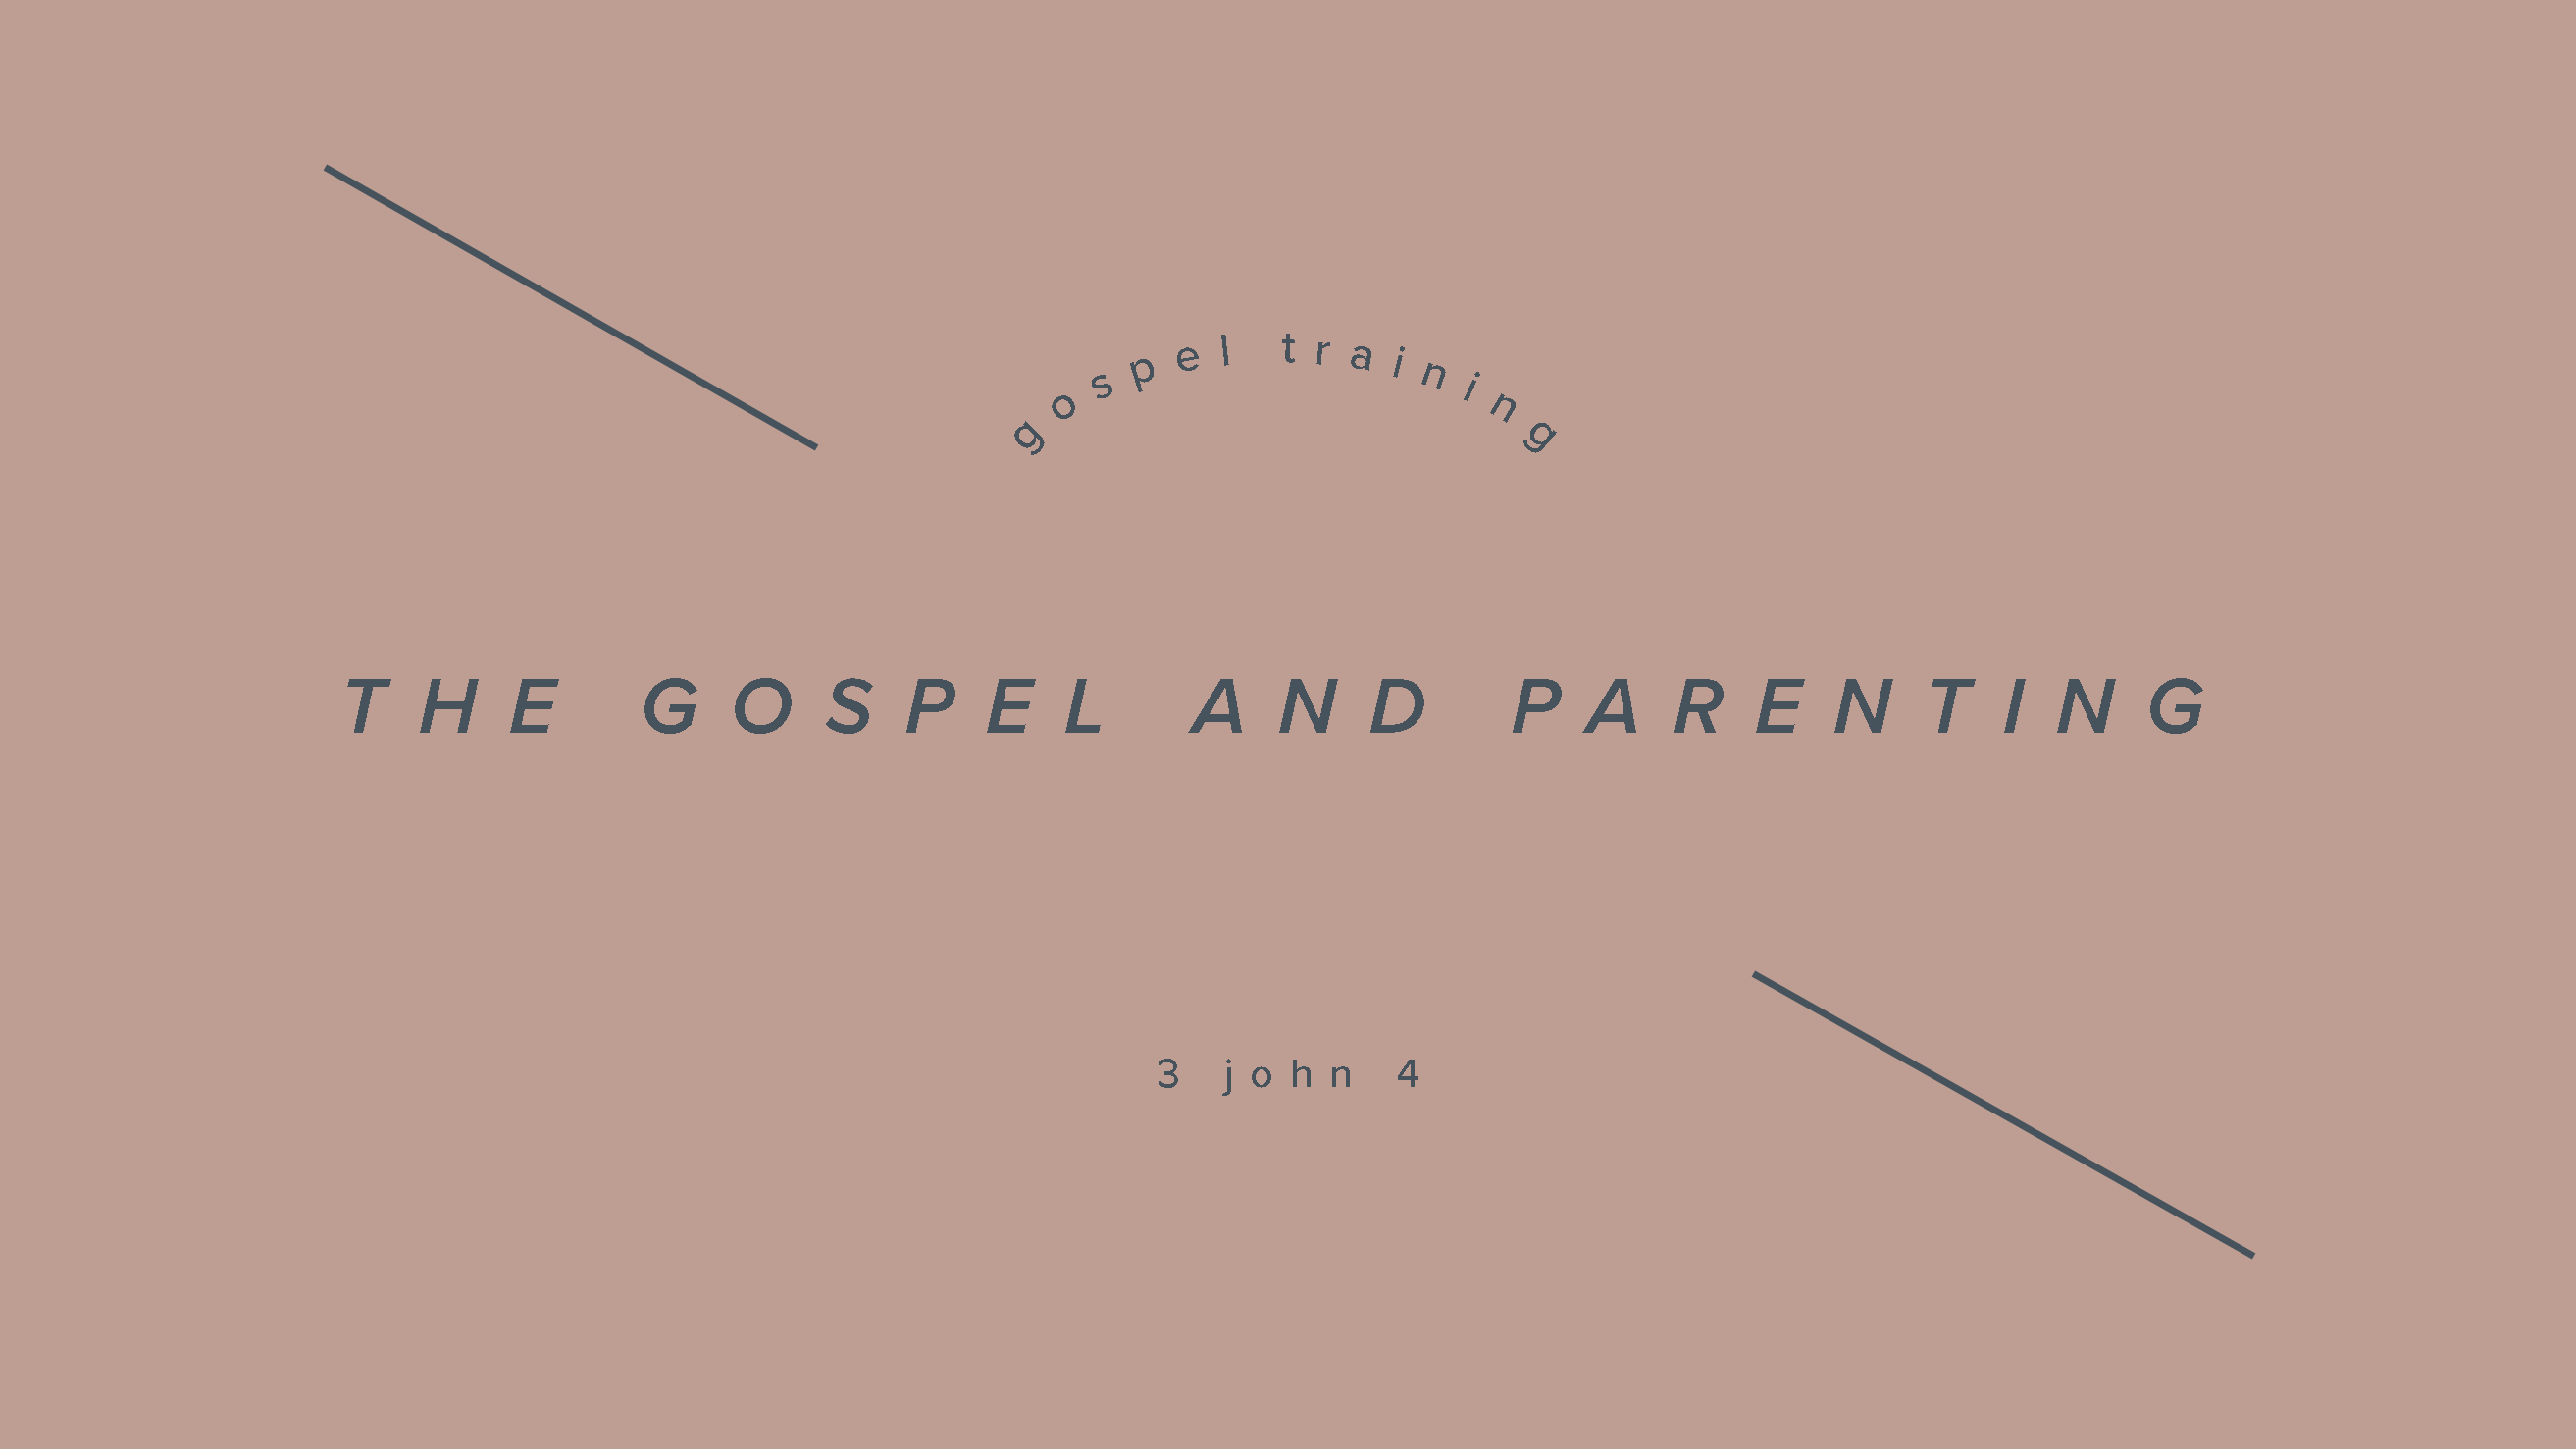 The Gospel and parenting image